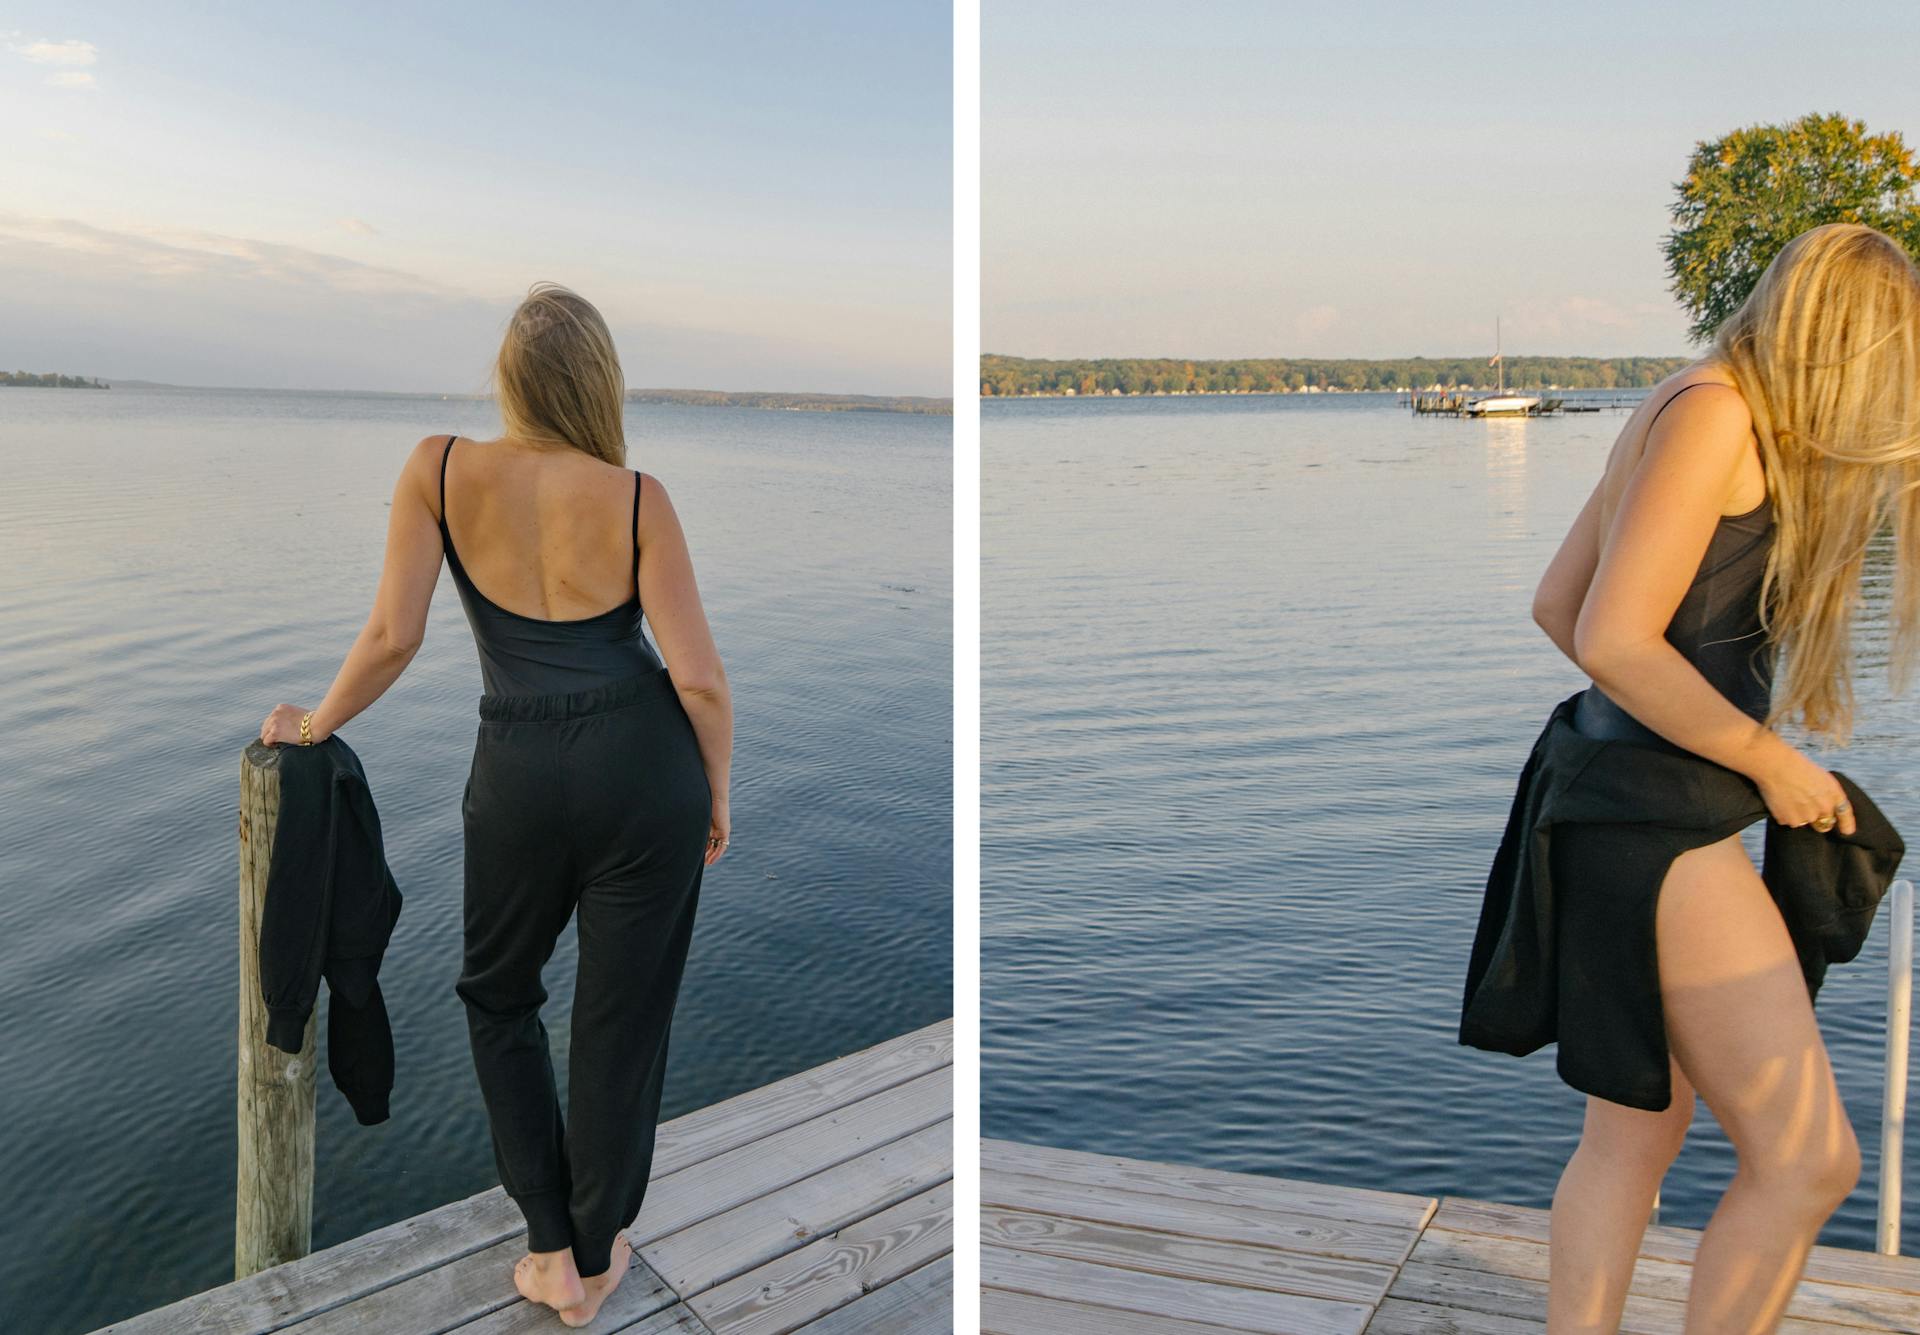 A woman wearing all black stands on a lake dock